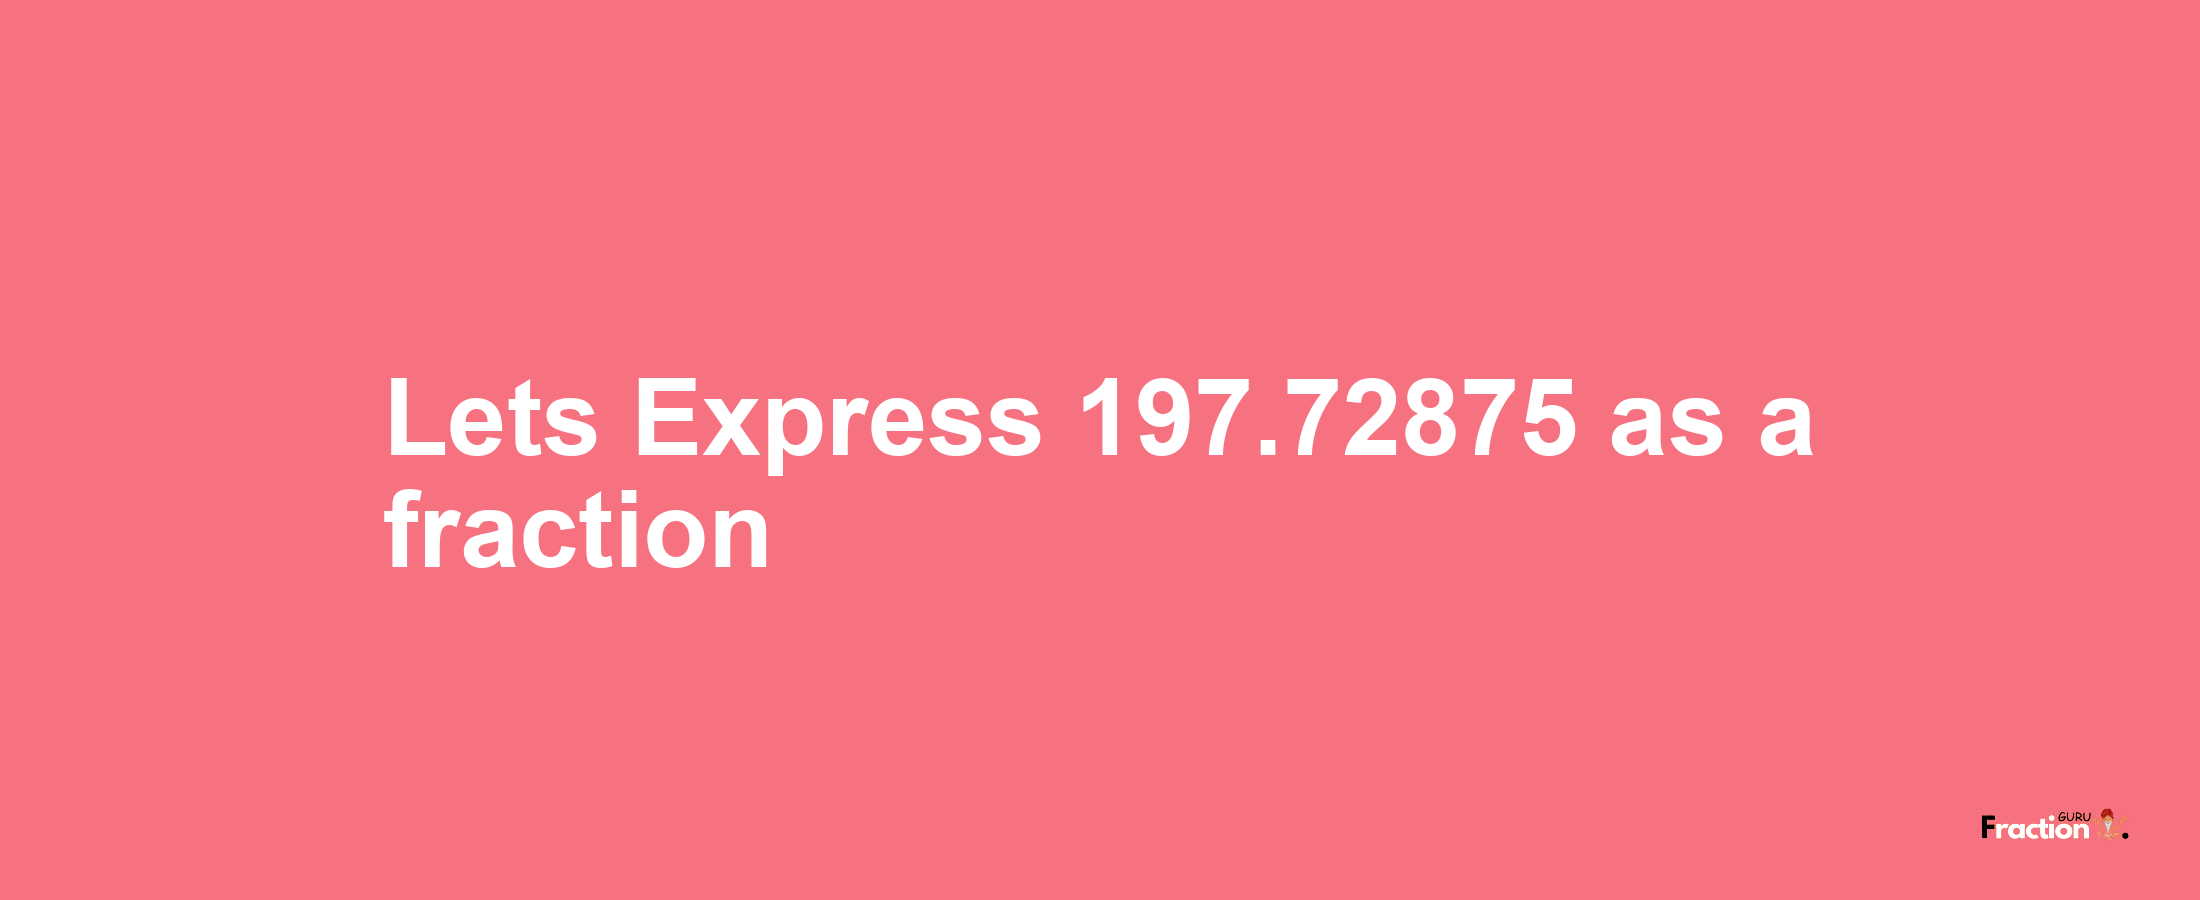 Lets Express 197.72875 as afraction